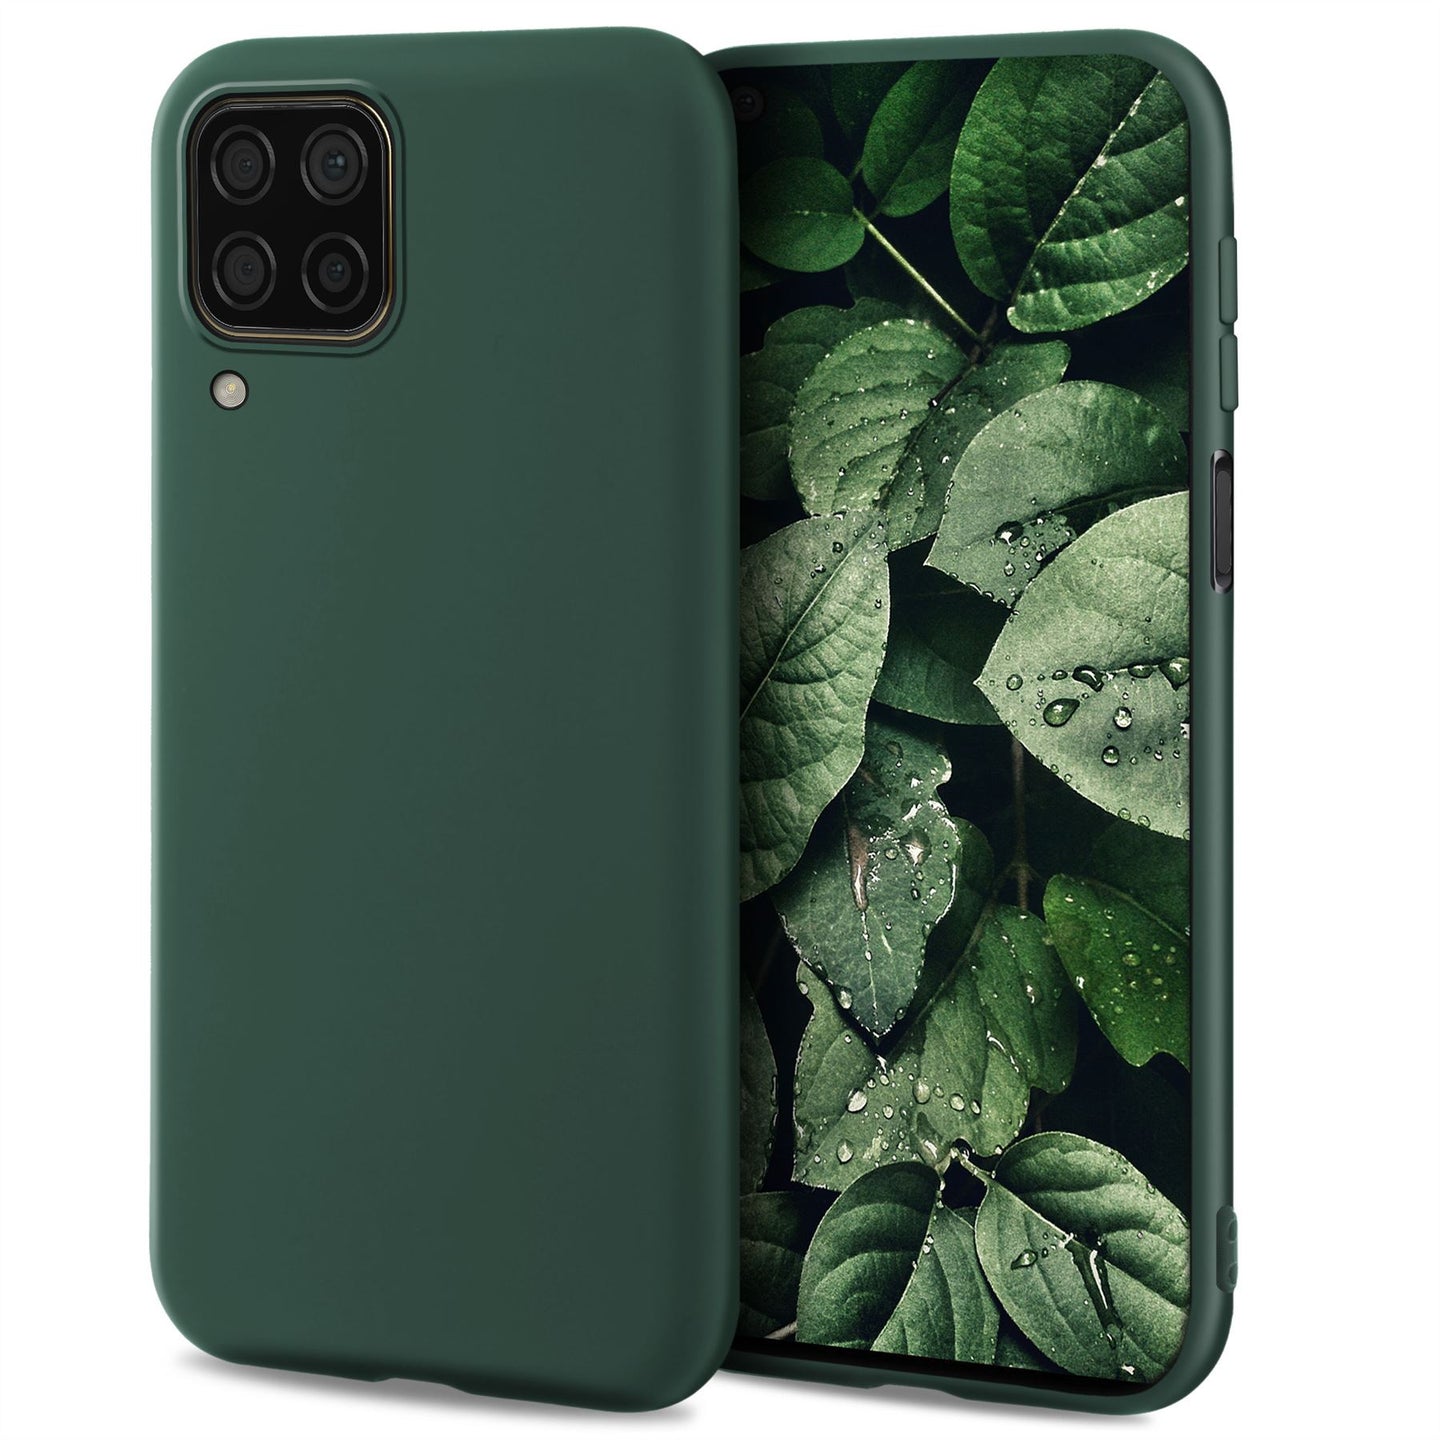 Moozy Minimalist Series Silicone Case for Huawei P40 Lite, Midnight Green - Matte Finish Slim Soft TPU Cover